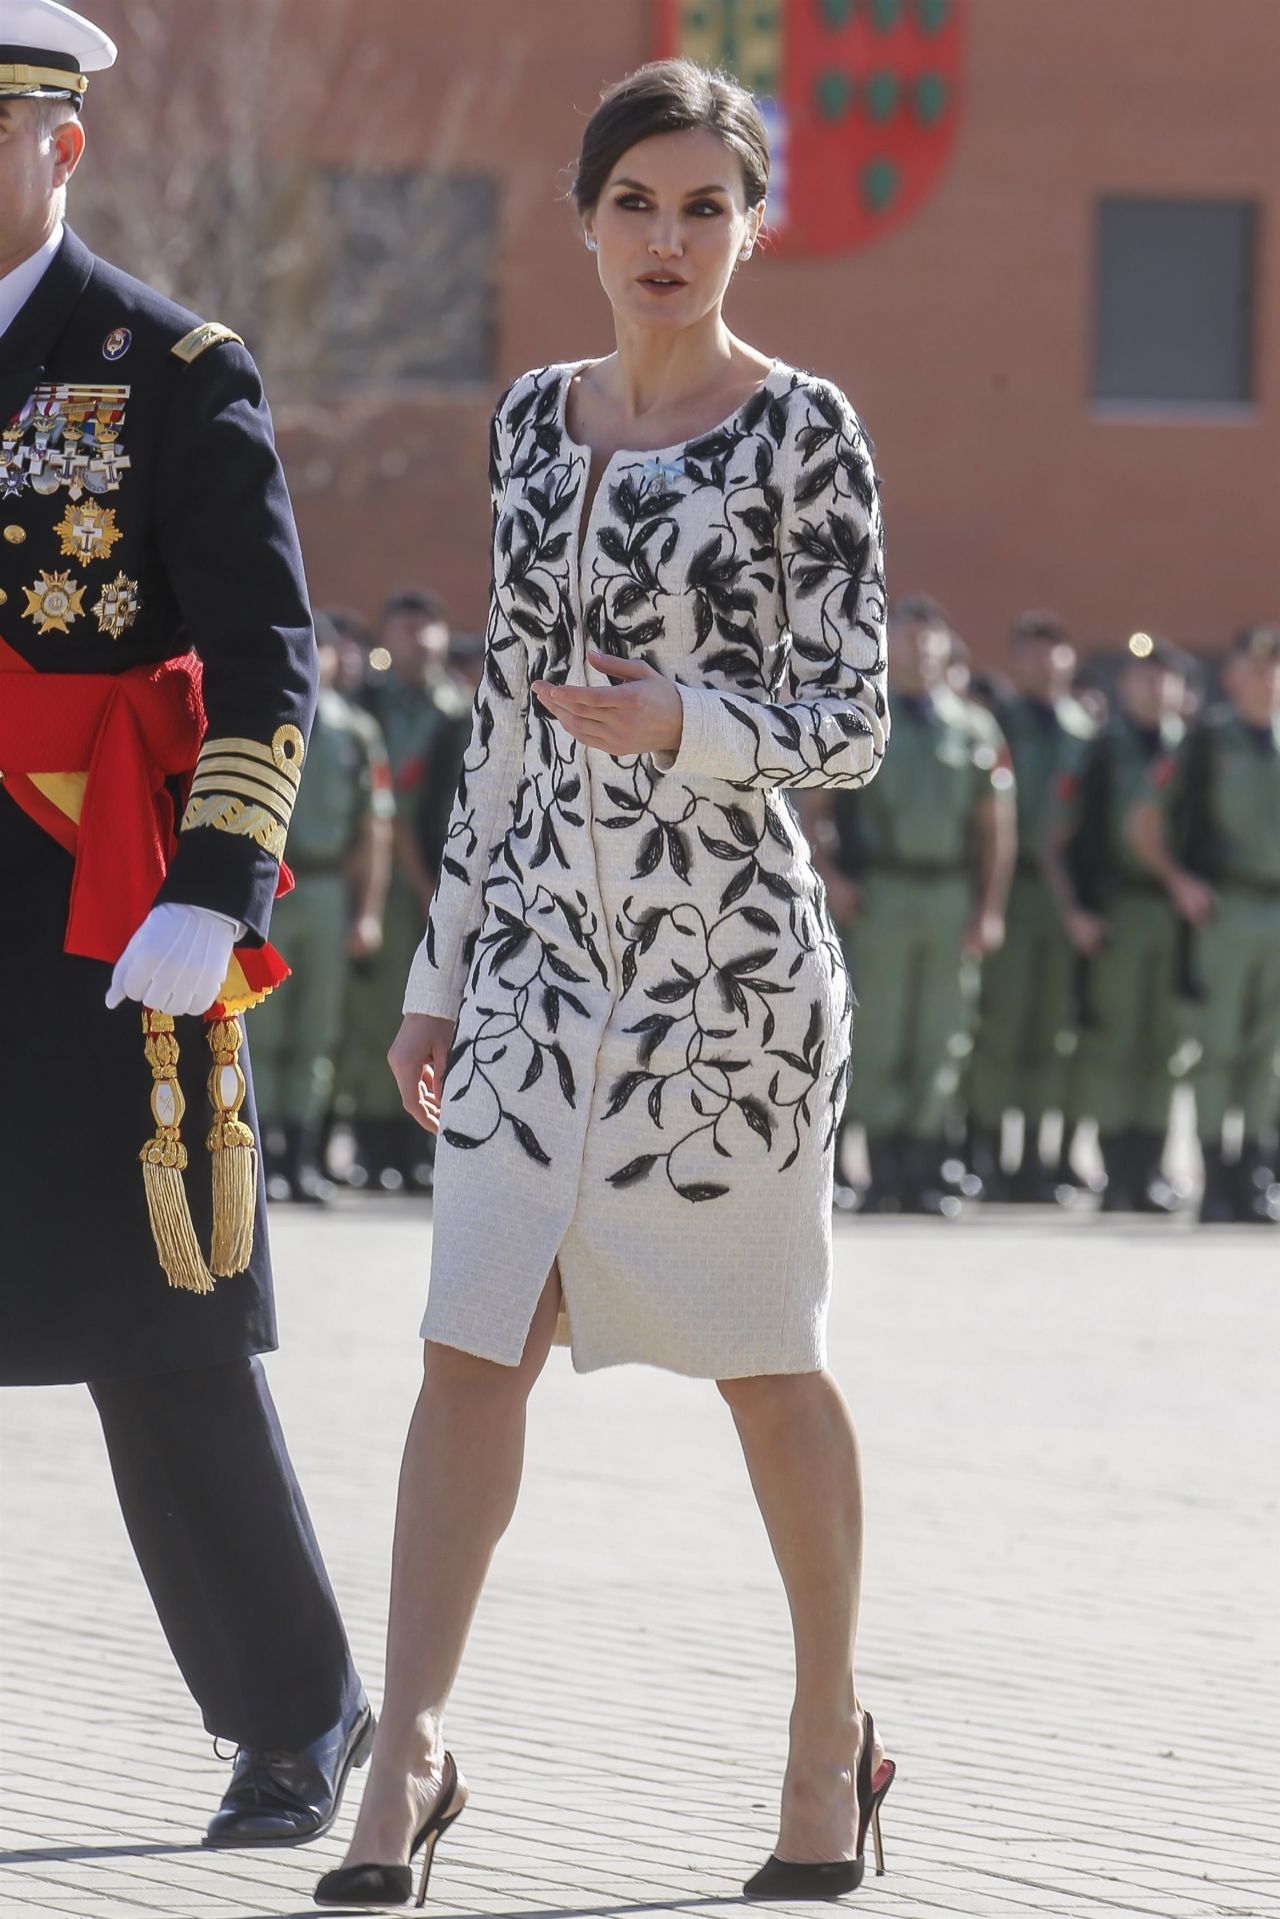 Queen Letizia of Spain - Delivery of the National Flag to the 